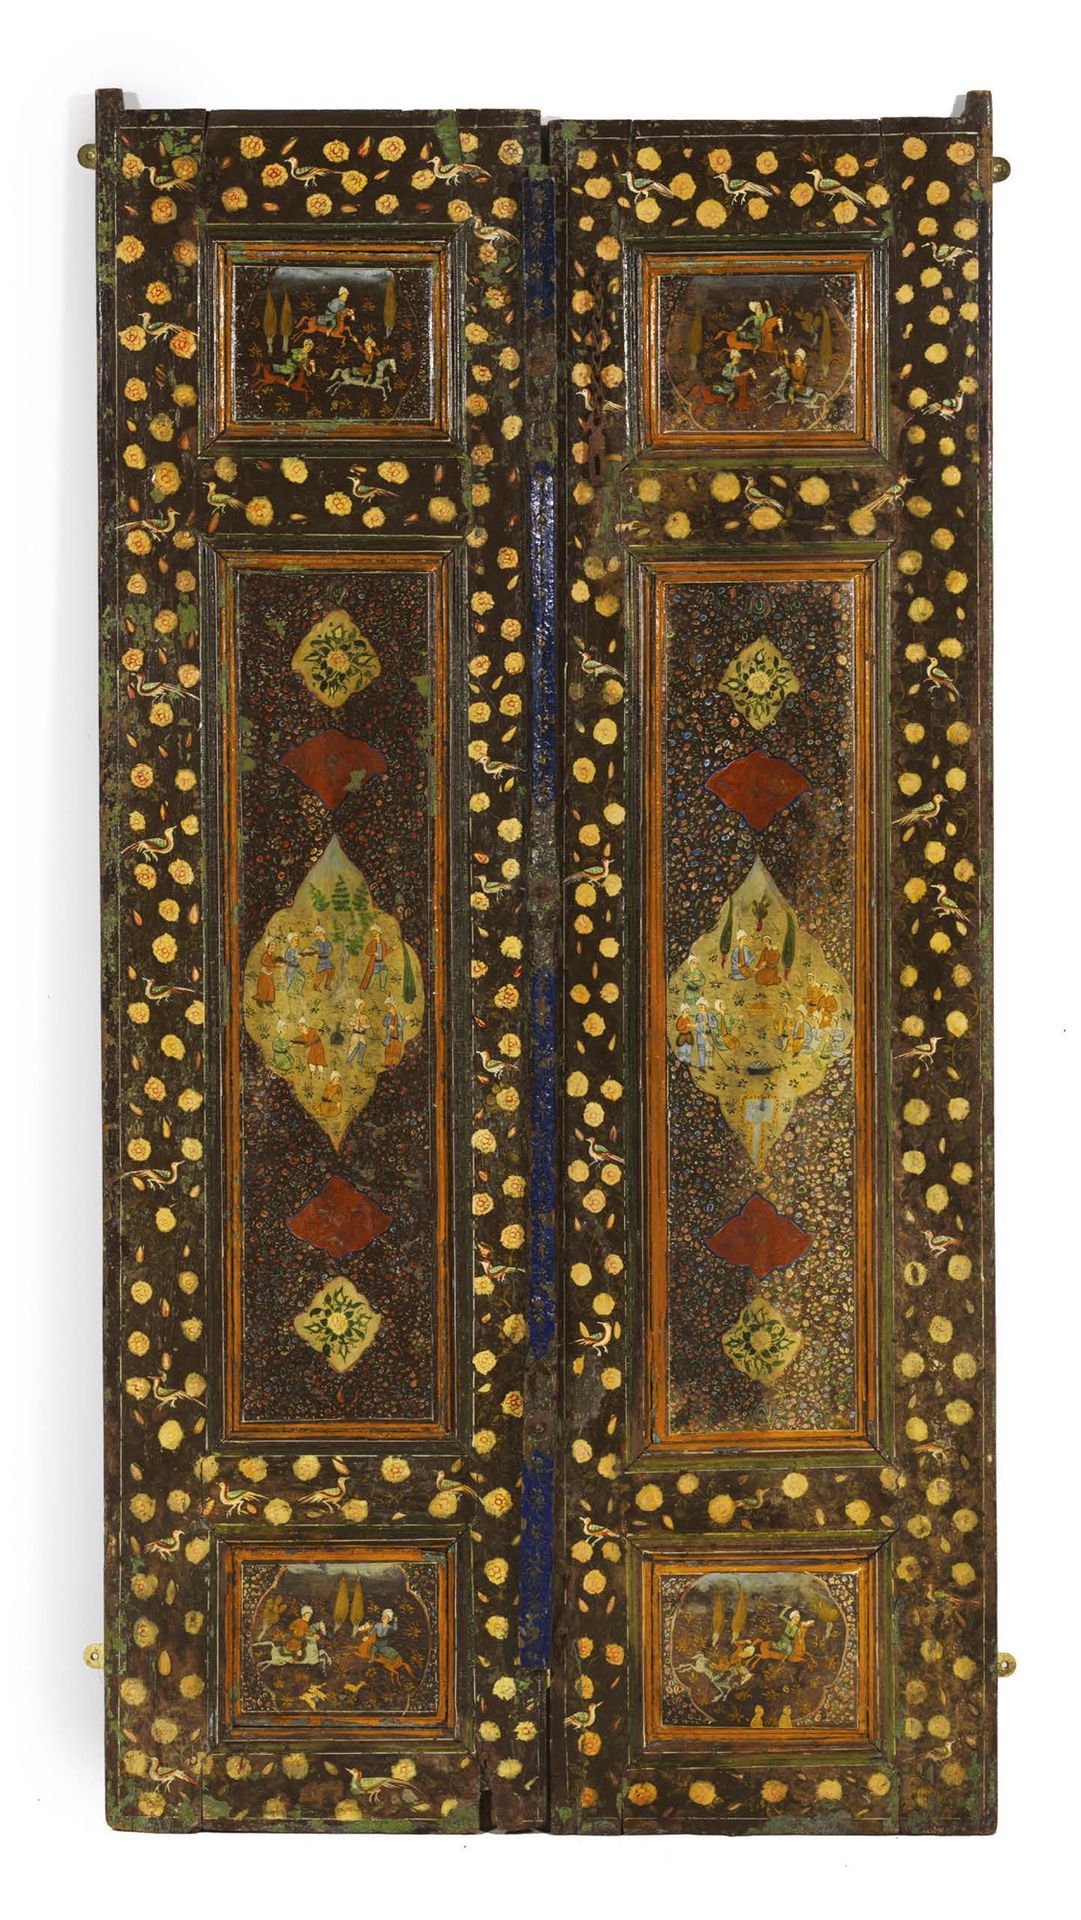 Null QADJAR DOORS.
Wood with polychrome painted decoration. Decorated with flowe&hellip;